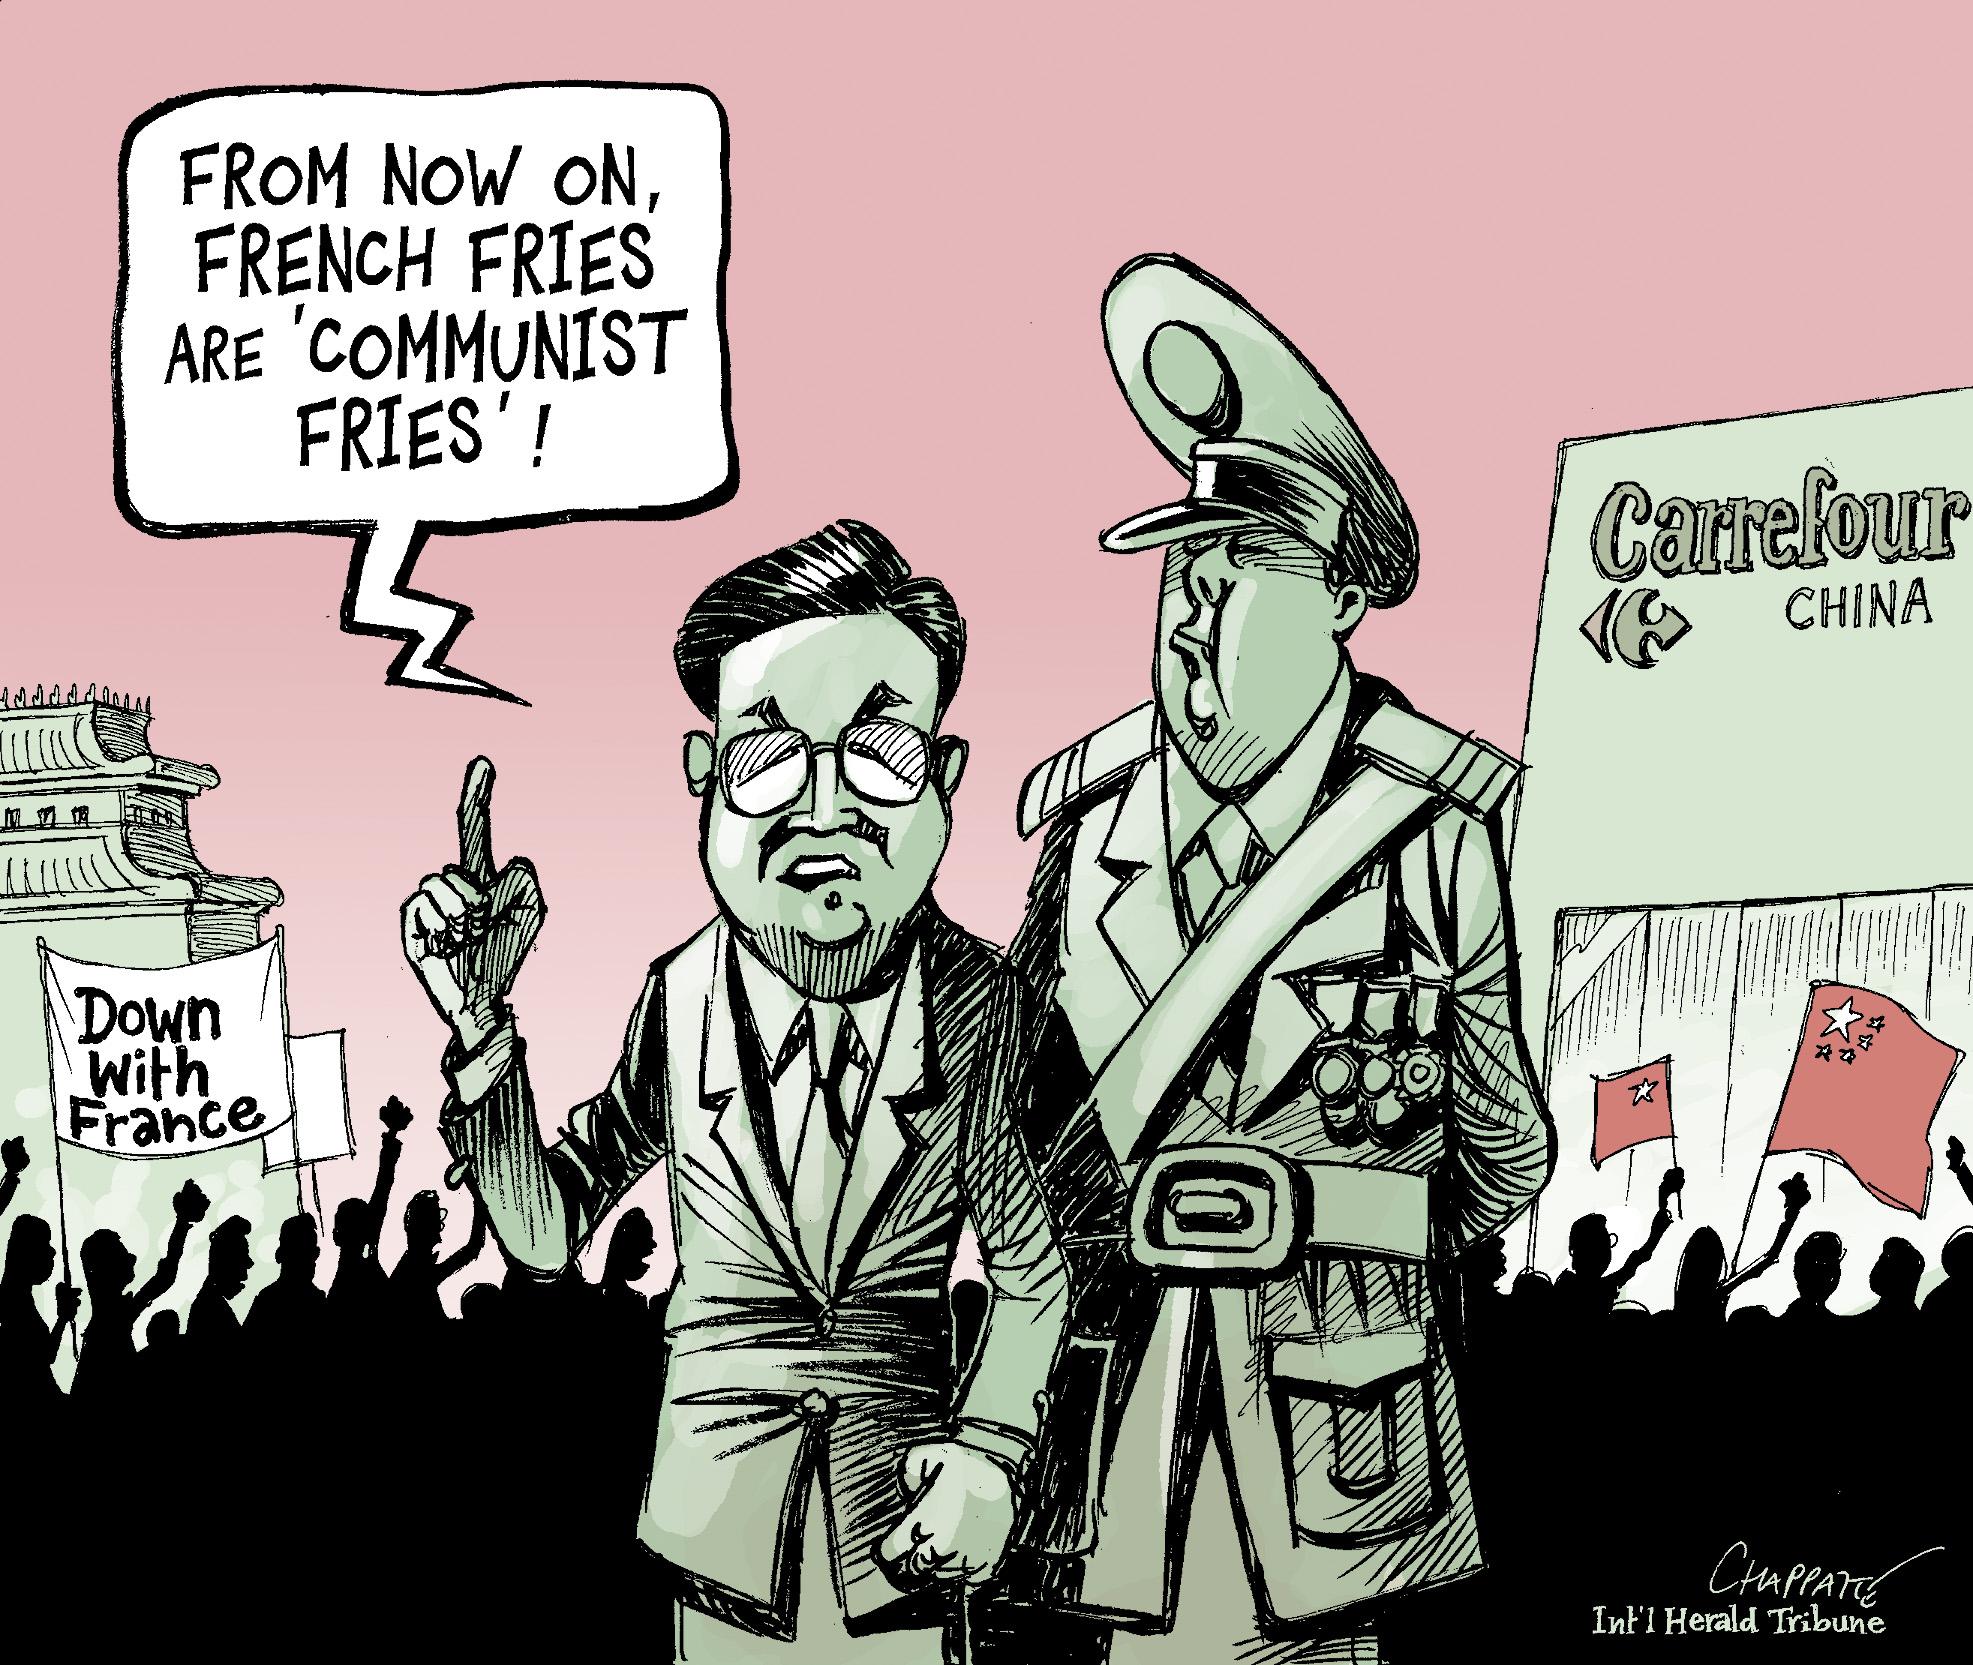 Anti-French Sentiment in China